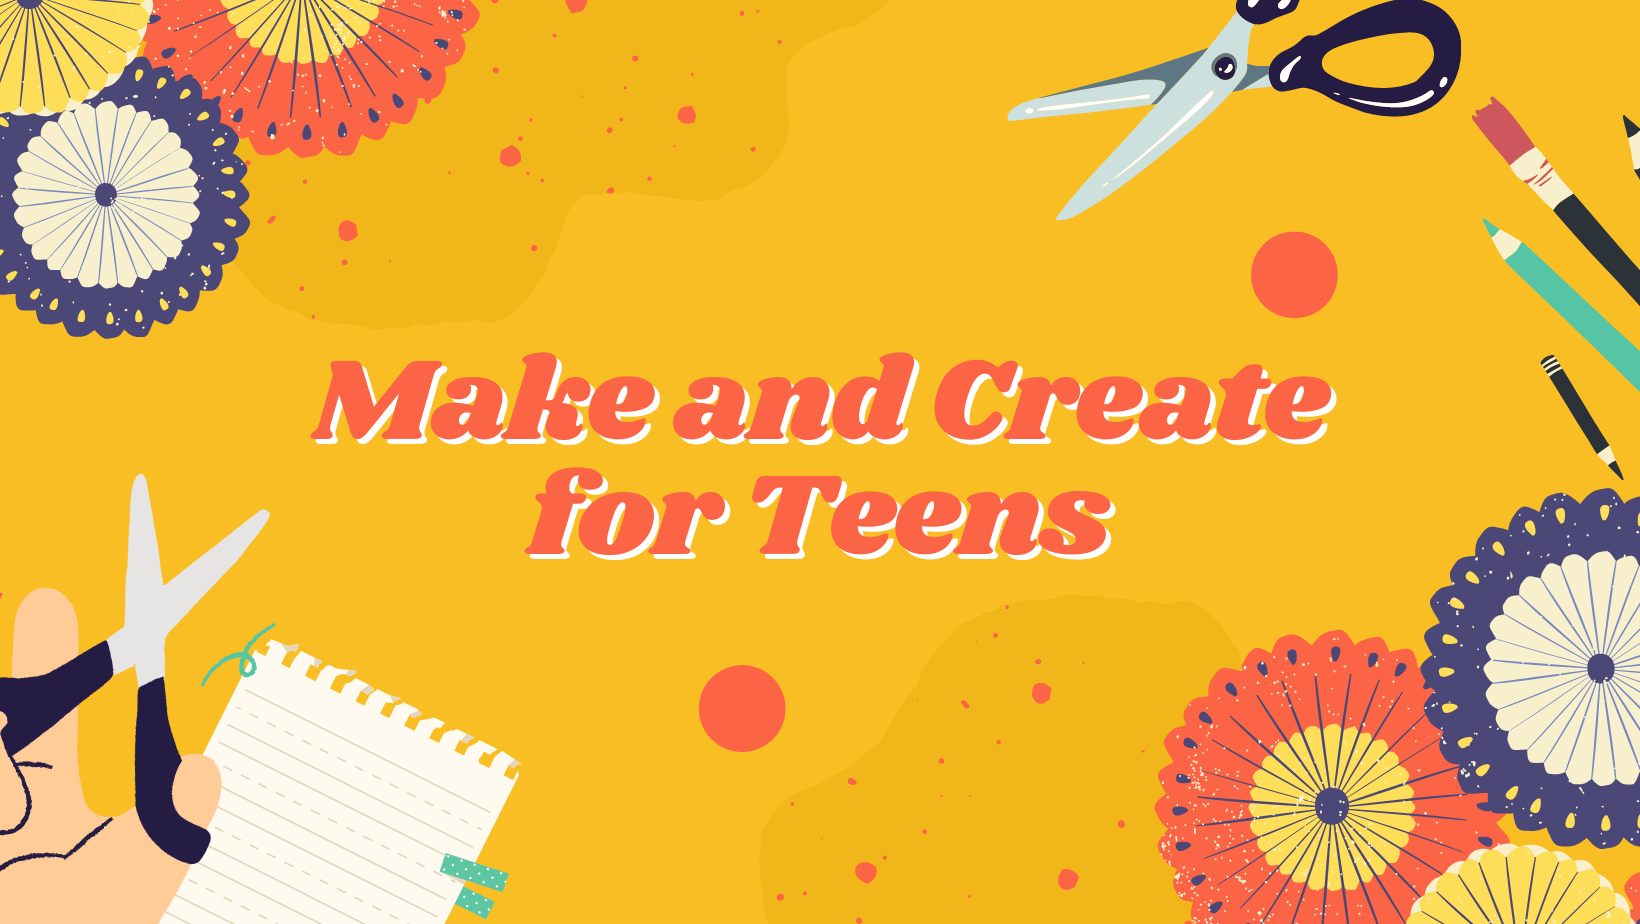 make and creat for teens text on yellow background with craft supplies surrounding it